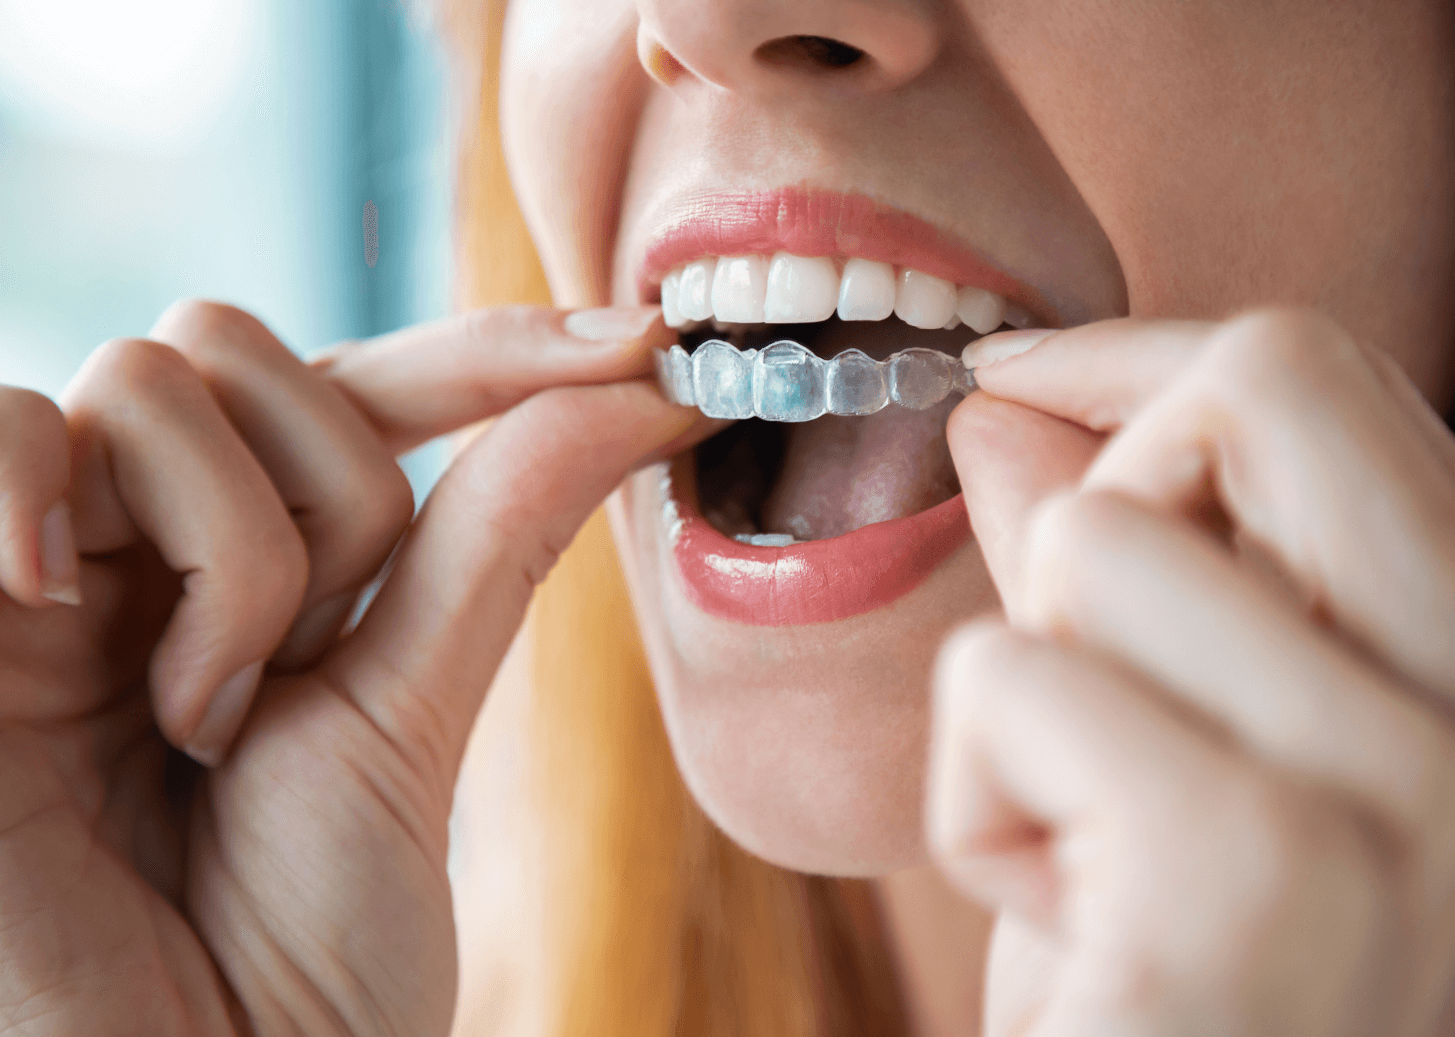 Invisalign aligners being put in mouth.